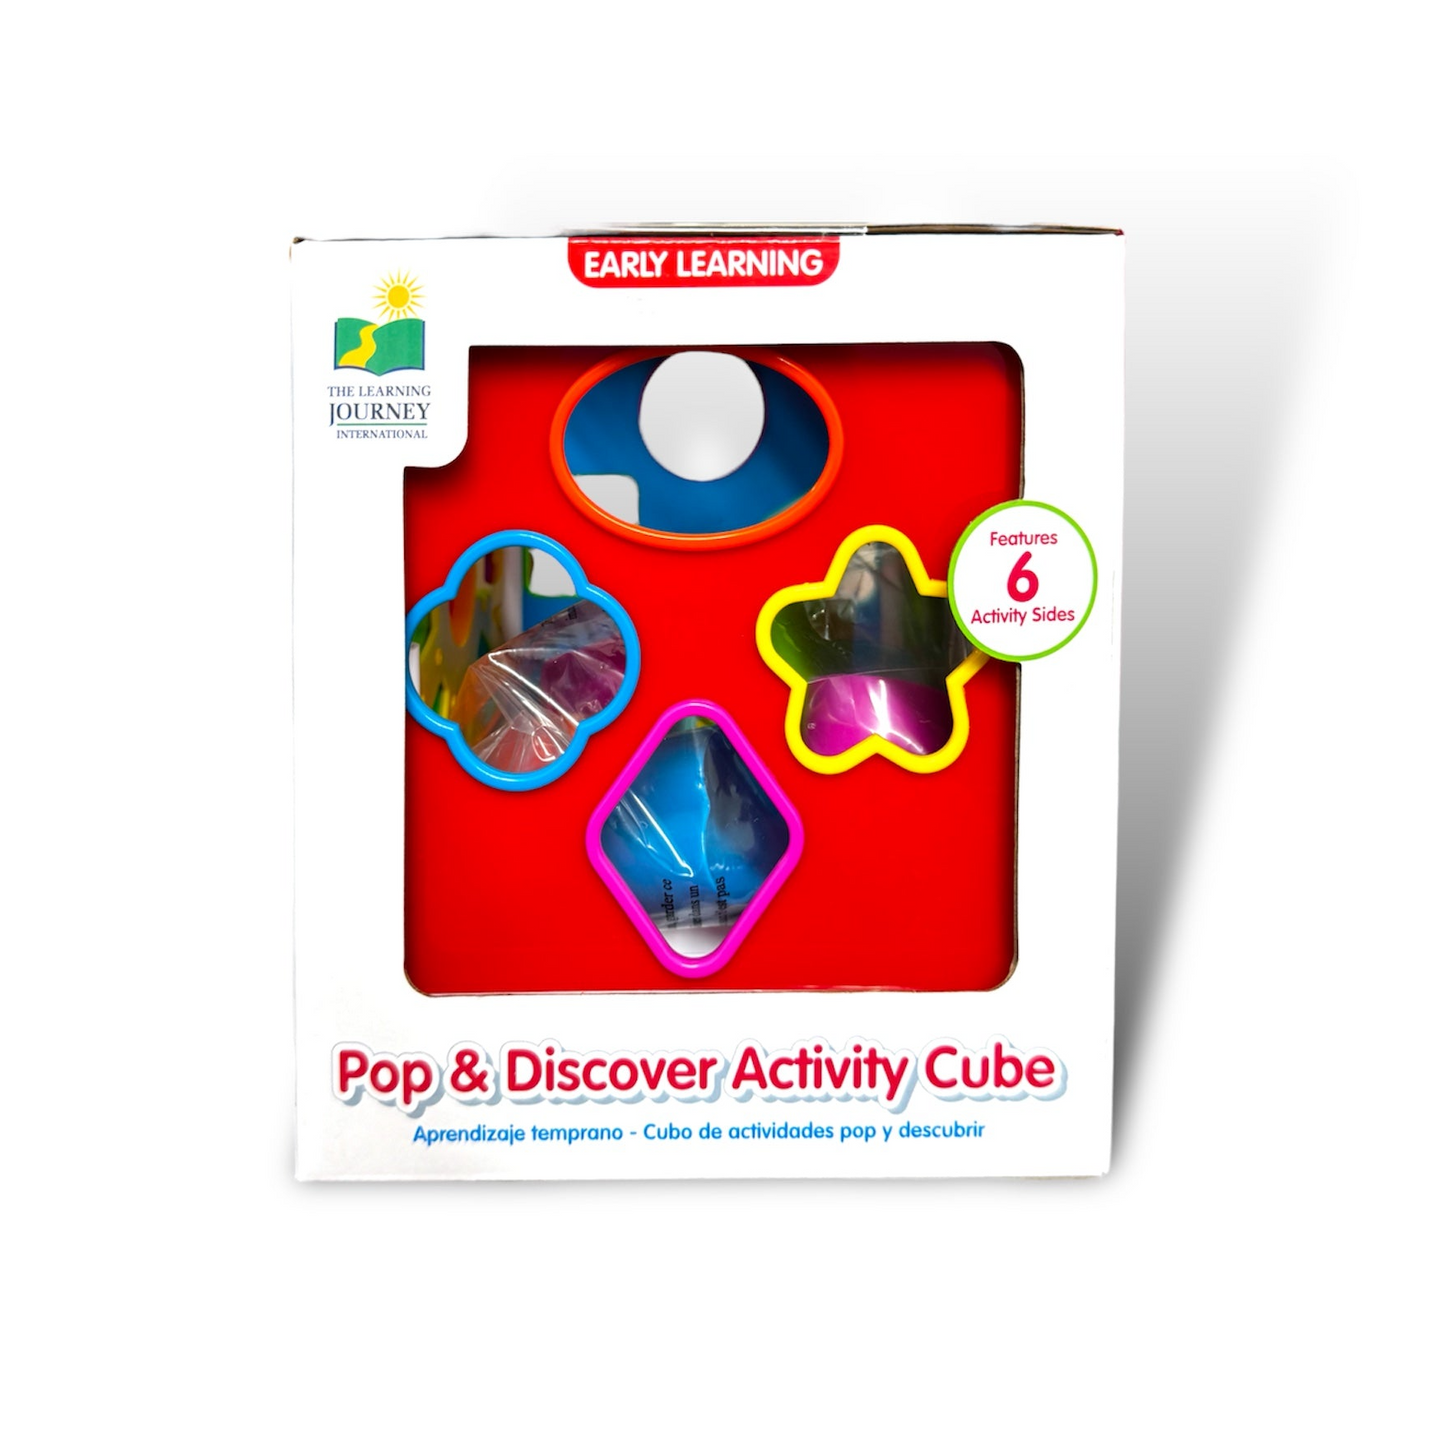 Pop & Discovery Activity Cube